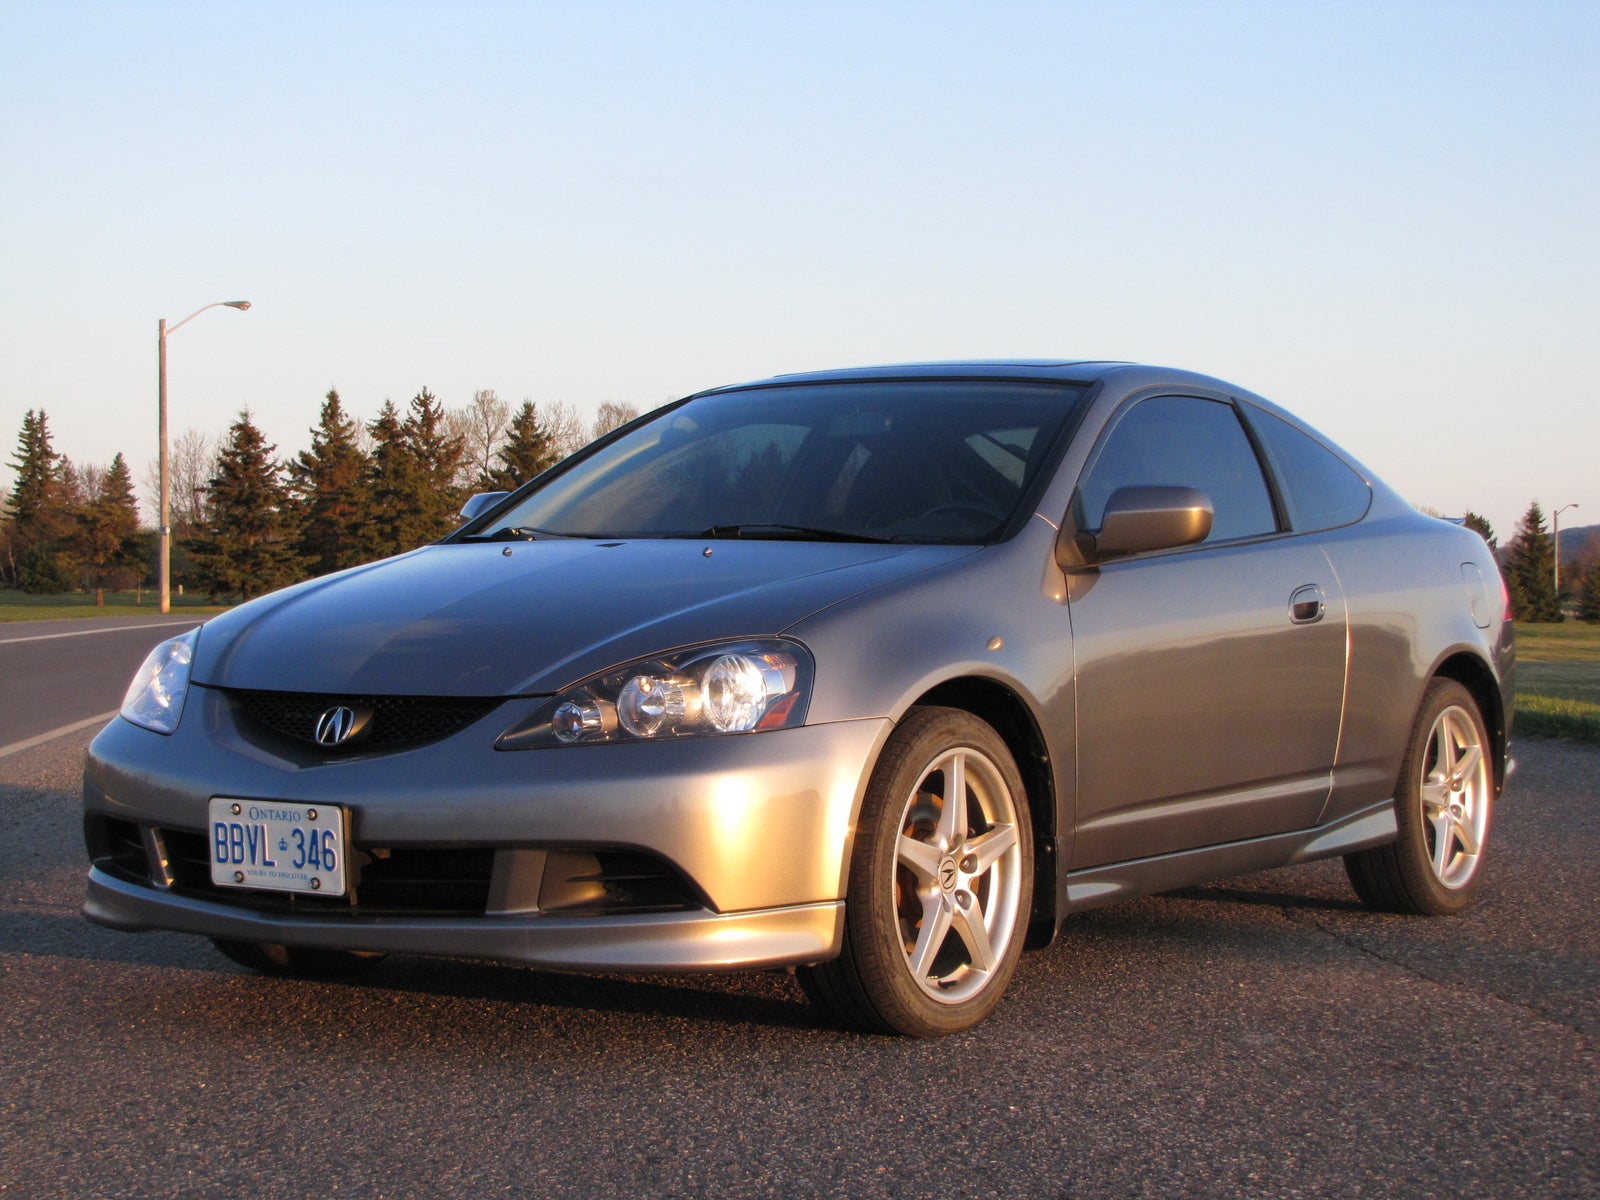 2005 Acura Rsx S by 2005 Acura Rsx Pictures Cargurus. 